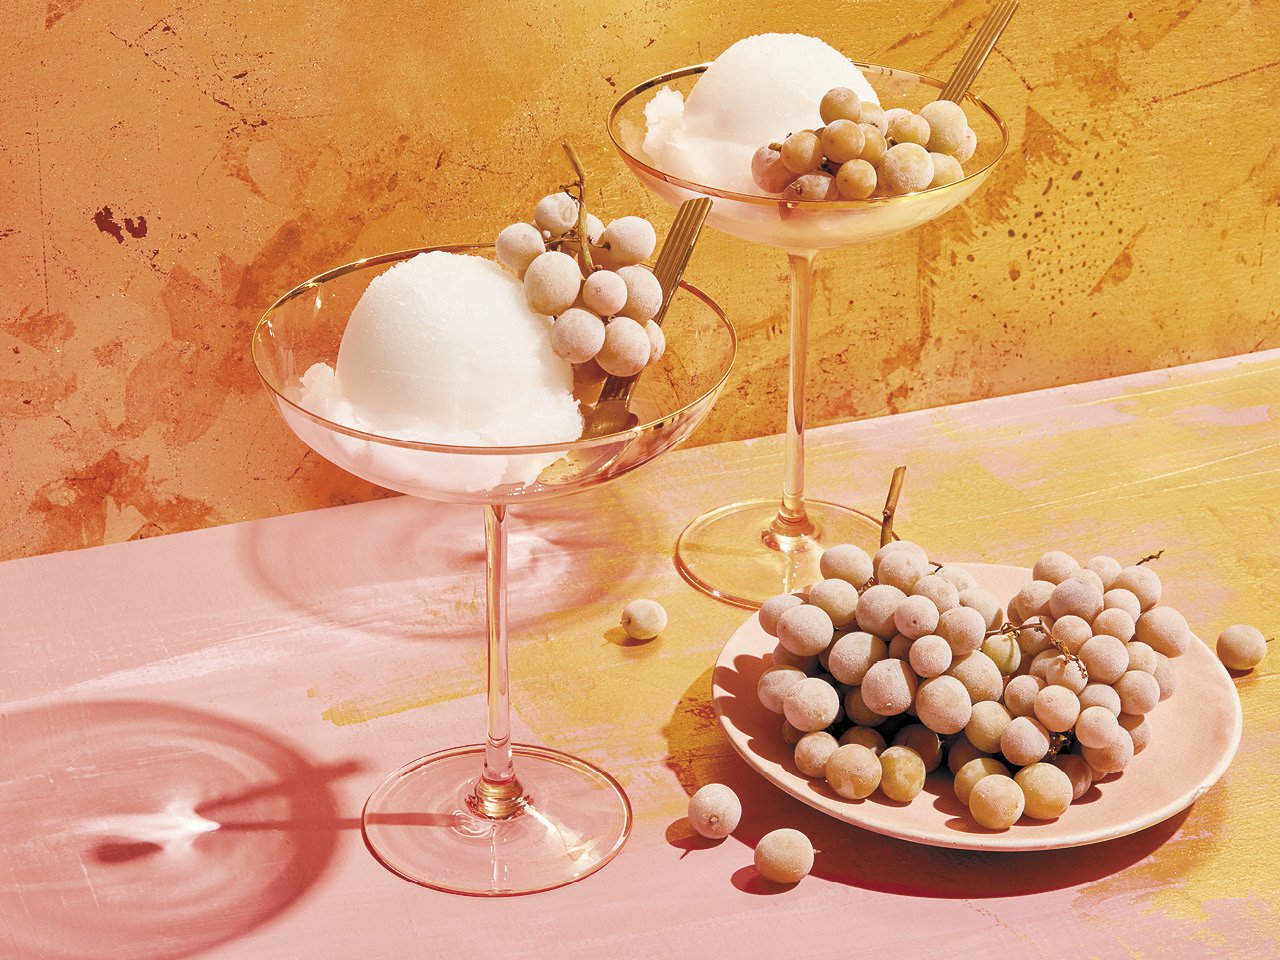 Two glasses of champagne sorbet, served alongside champagne grapes